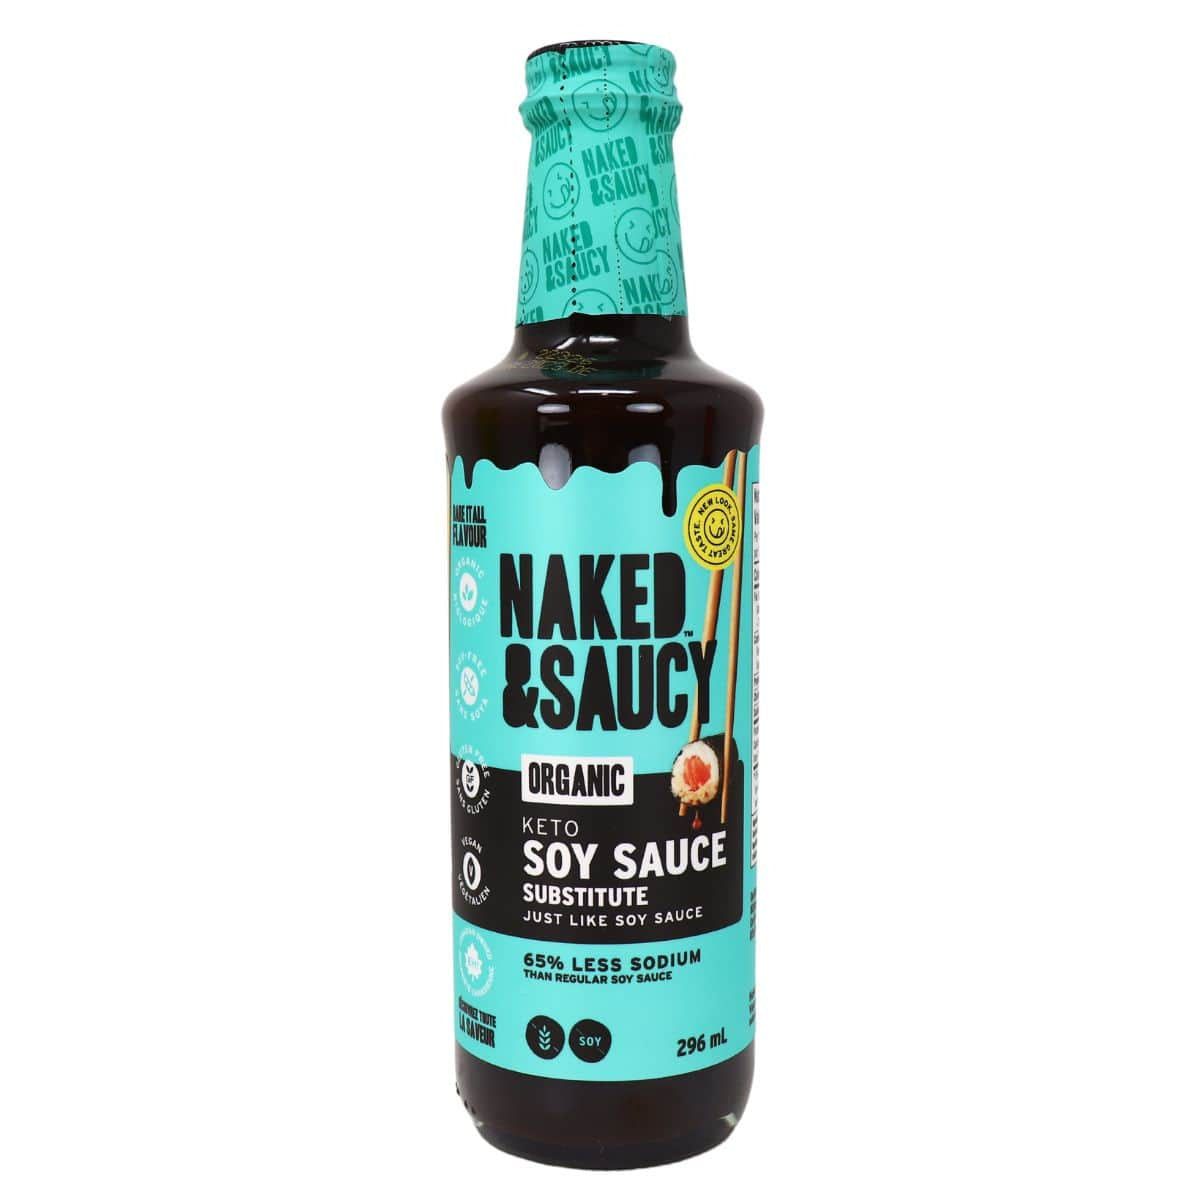 Naked & Saucy Organic Soy Sauce Substitute